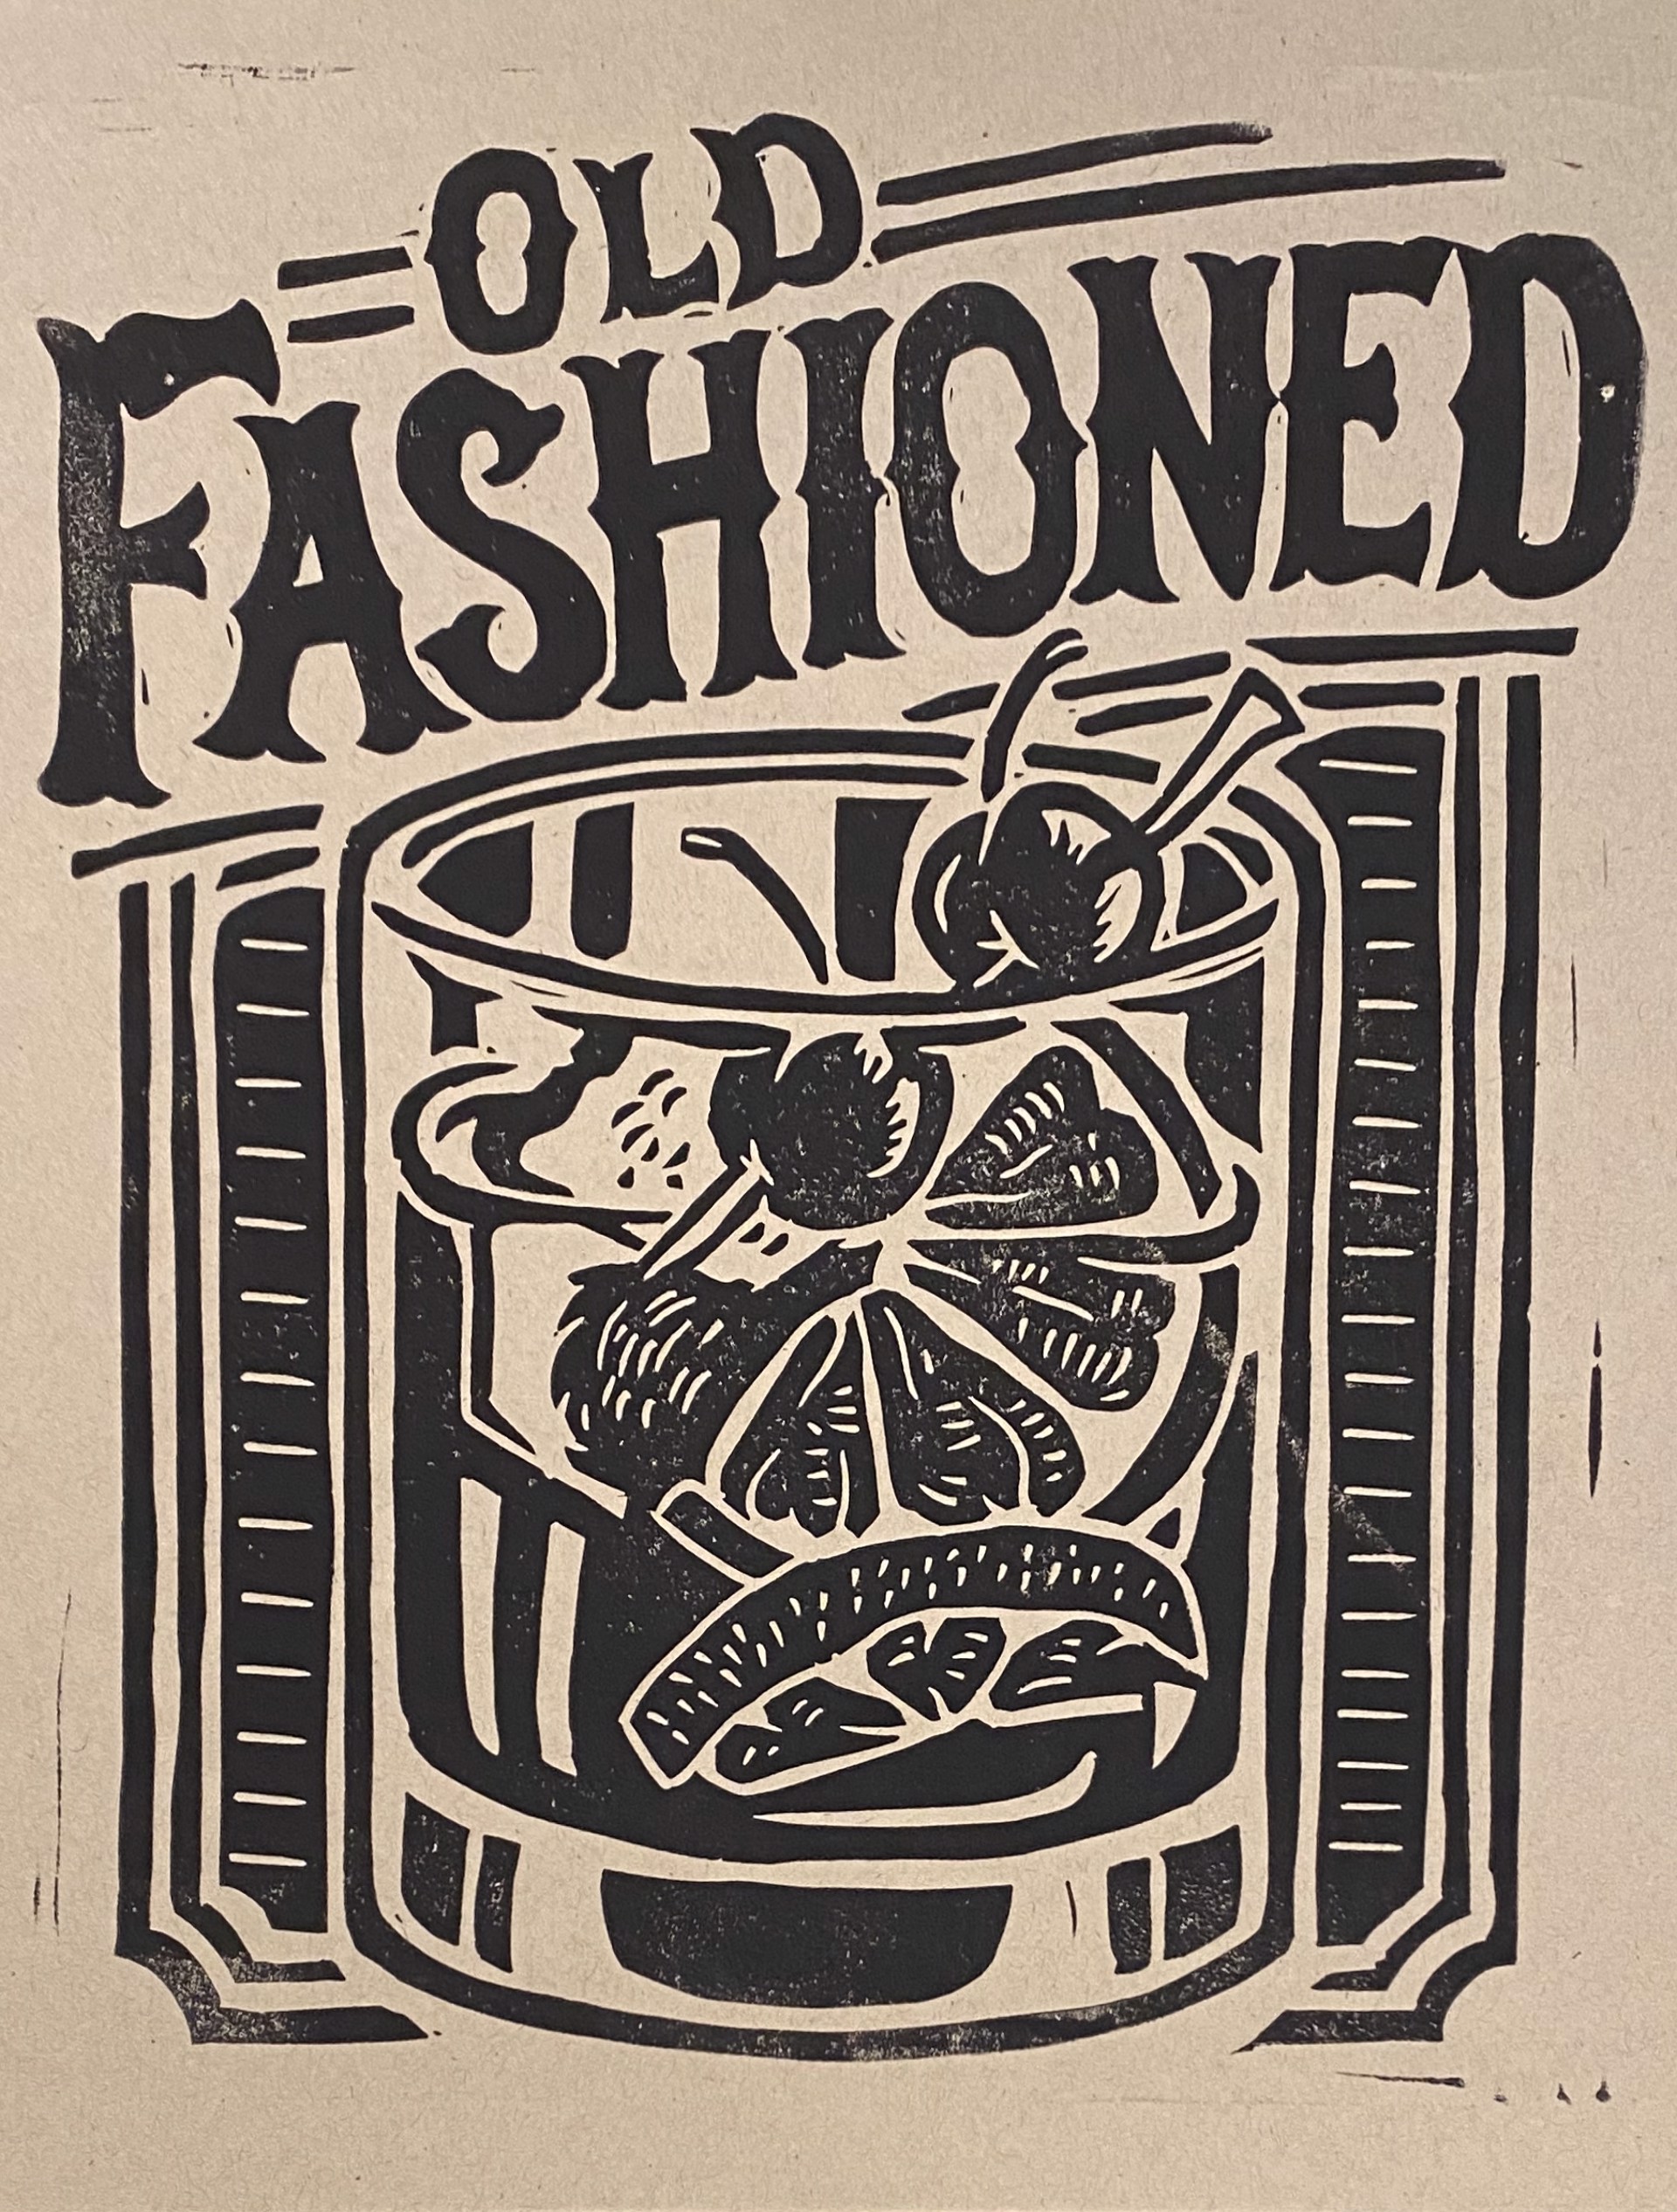 Old Fashioned by Derrick Castle